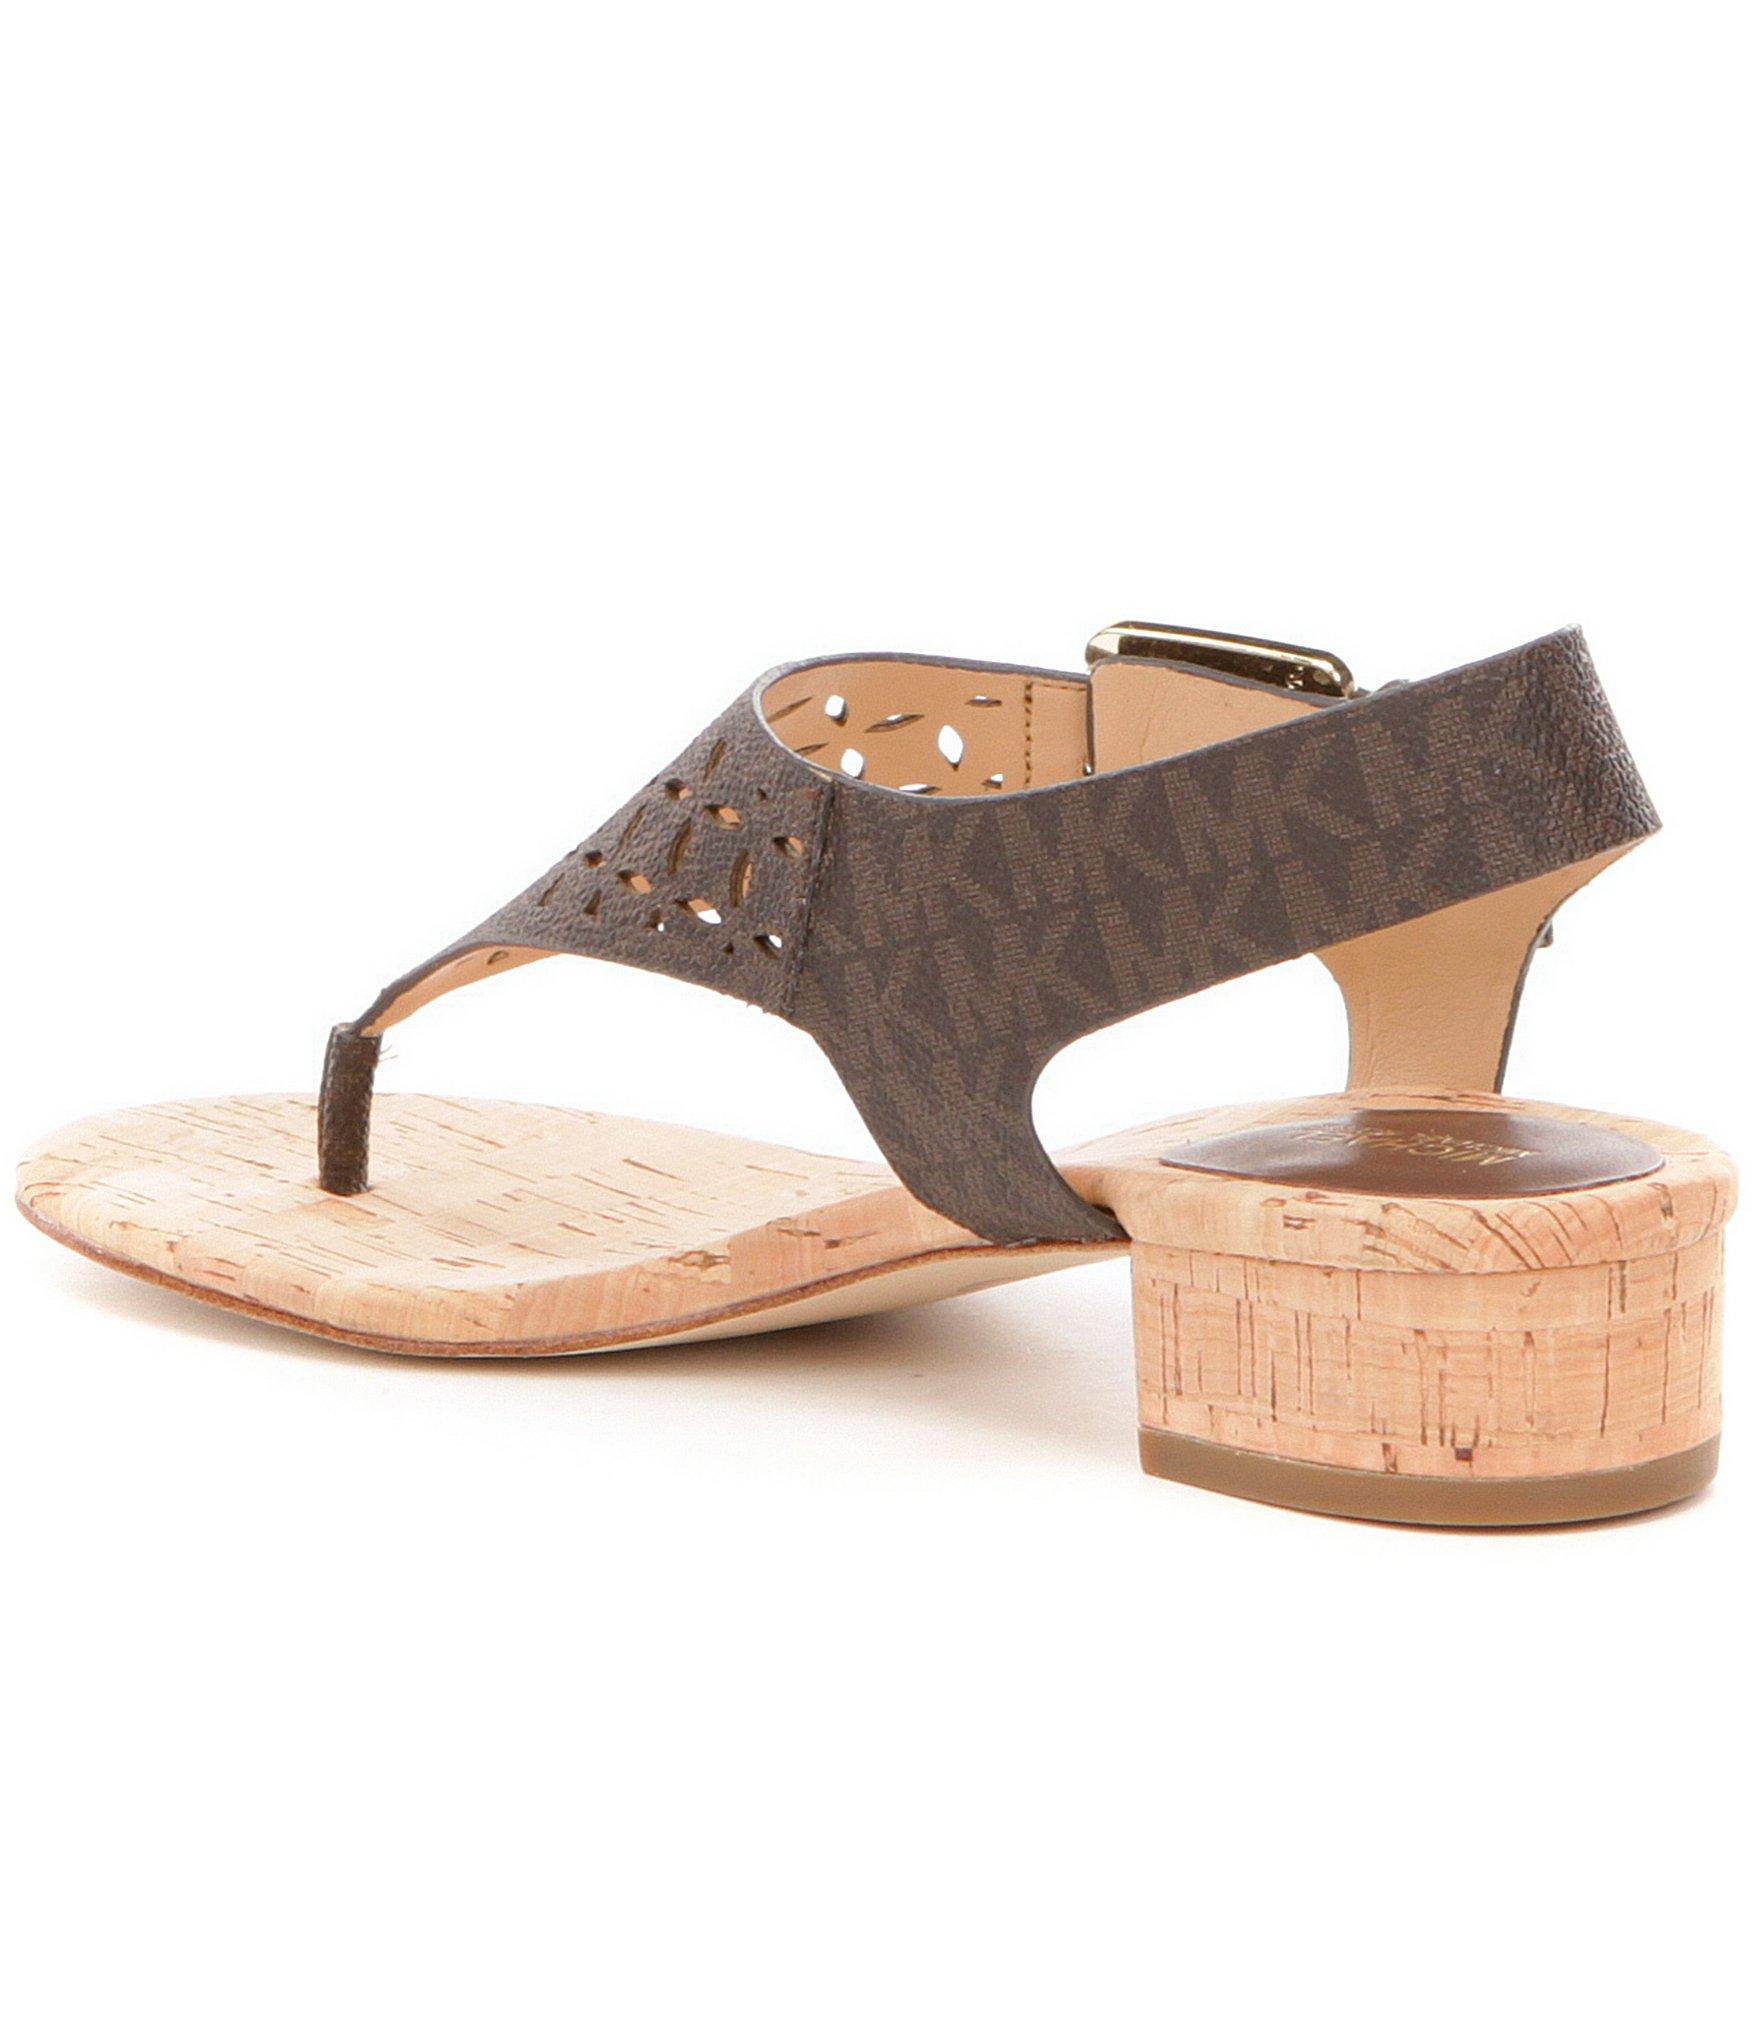 MICHAEL Michael Kors Rubber London Thong Sandals in Brown - Lyst